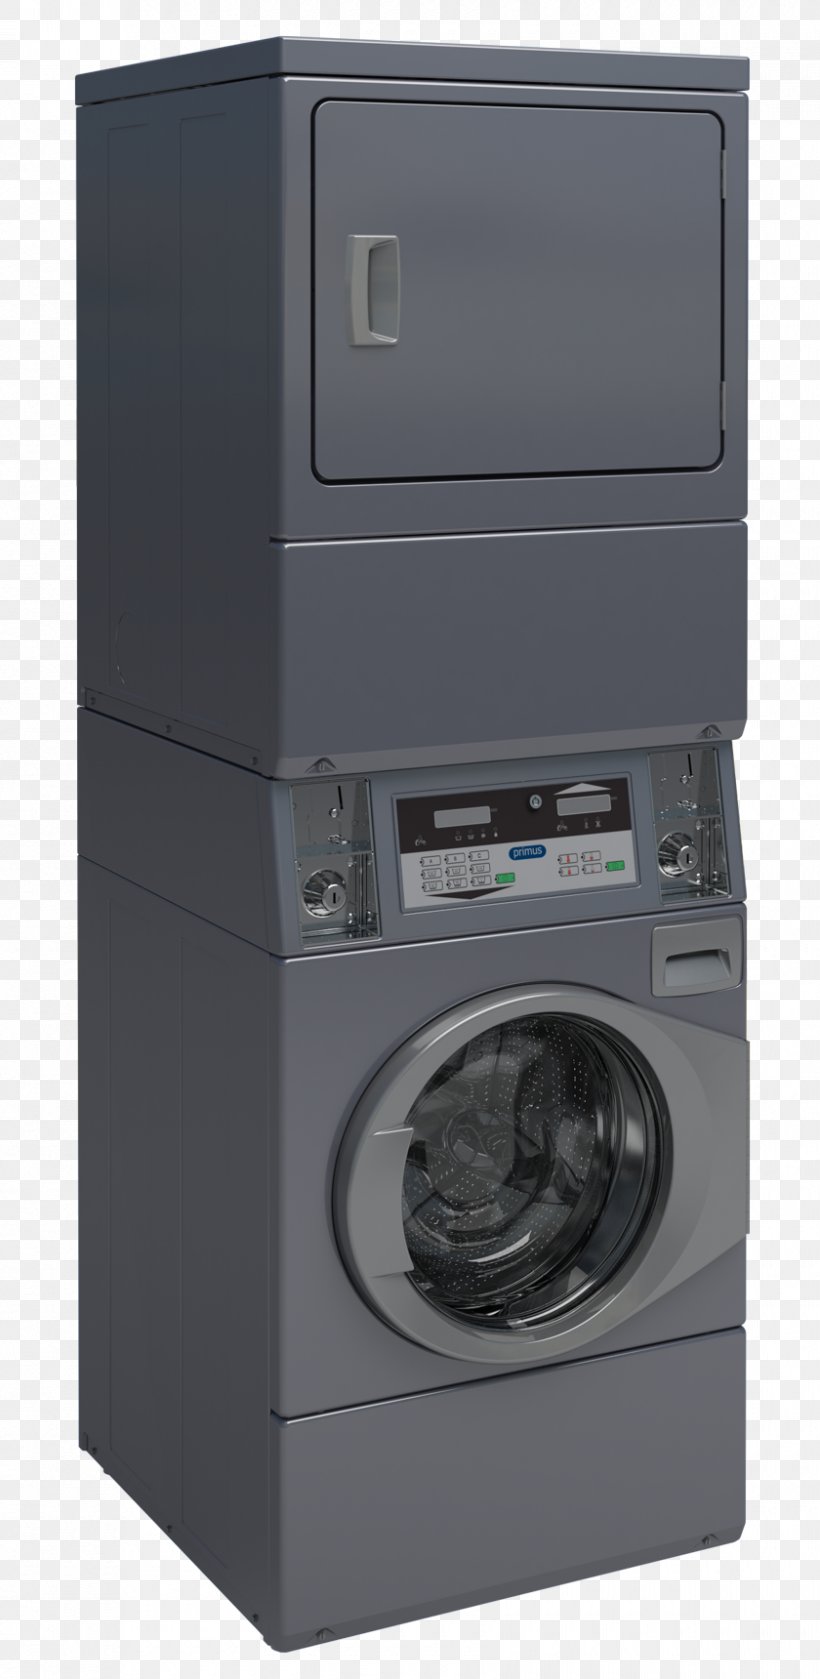 Washing Machines Laundry Clothes Dryer Combo Washer Dryer, PNG, 840x1720px, Washing Machines, Clothes Dryer, Combo Washer Dryer, Drum Drying, Drying Cabinet Download Free